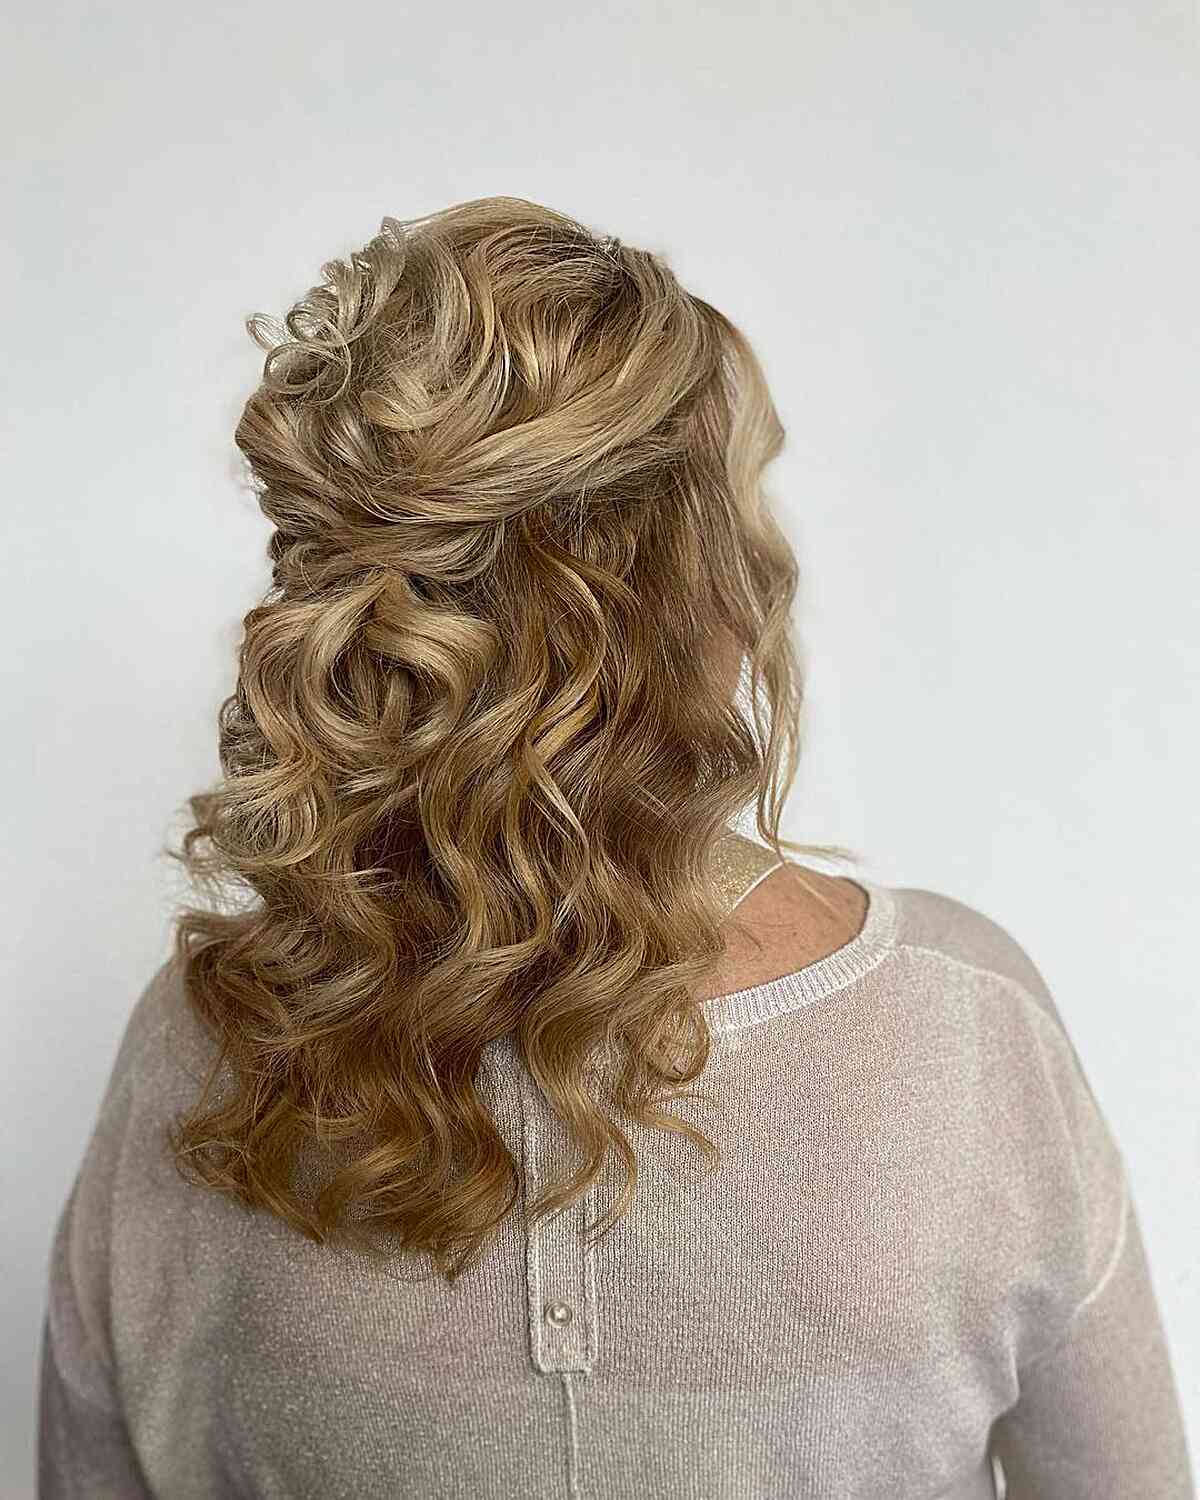 Formal Overlap Half-Up with Loose Curls for Medium-Length Wedding Guest Hair